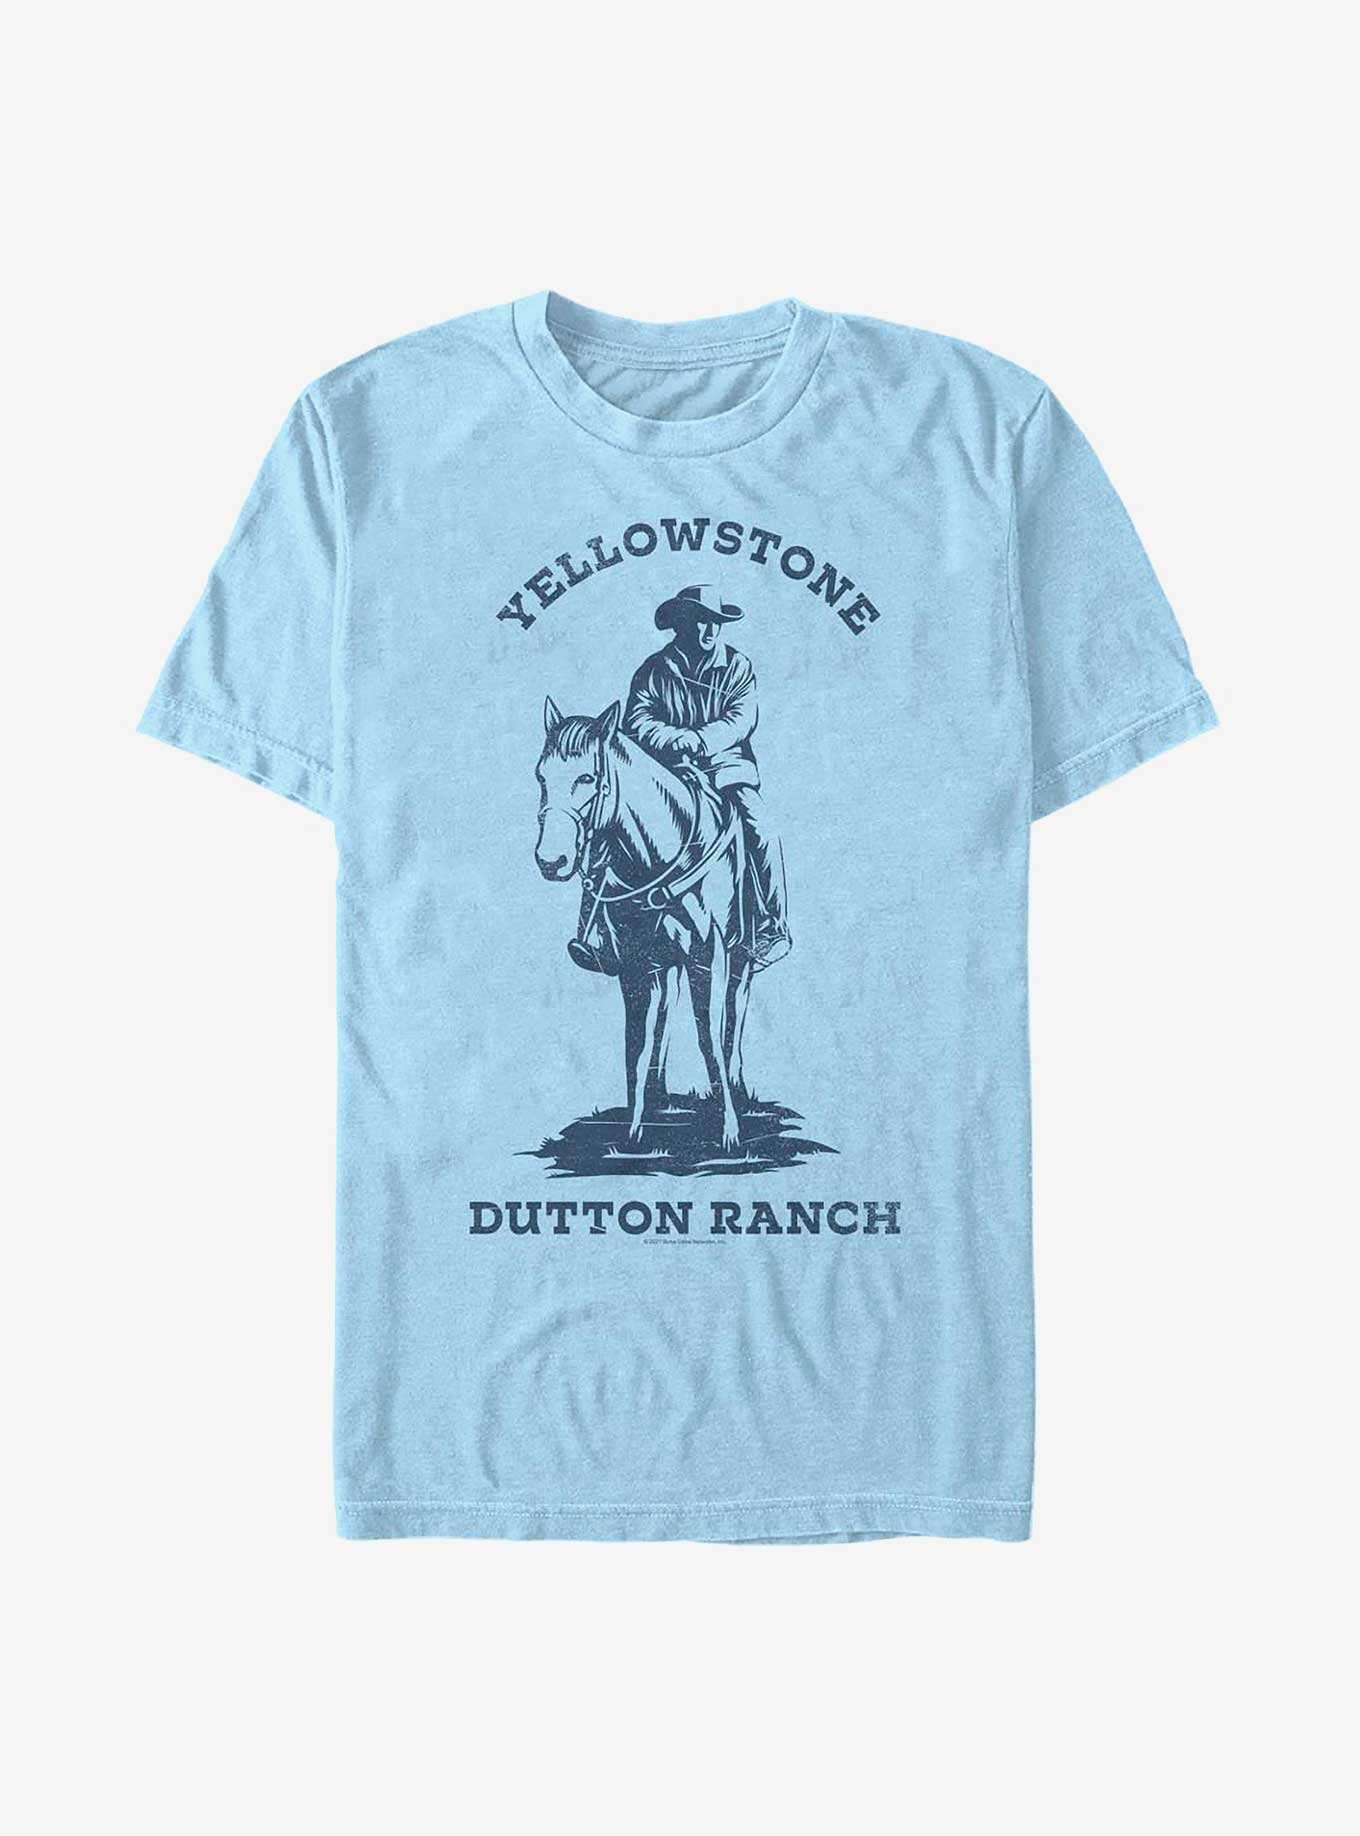 Yellowstone Dutton Ranch Distressed T-Shirt, , hi-res